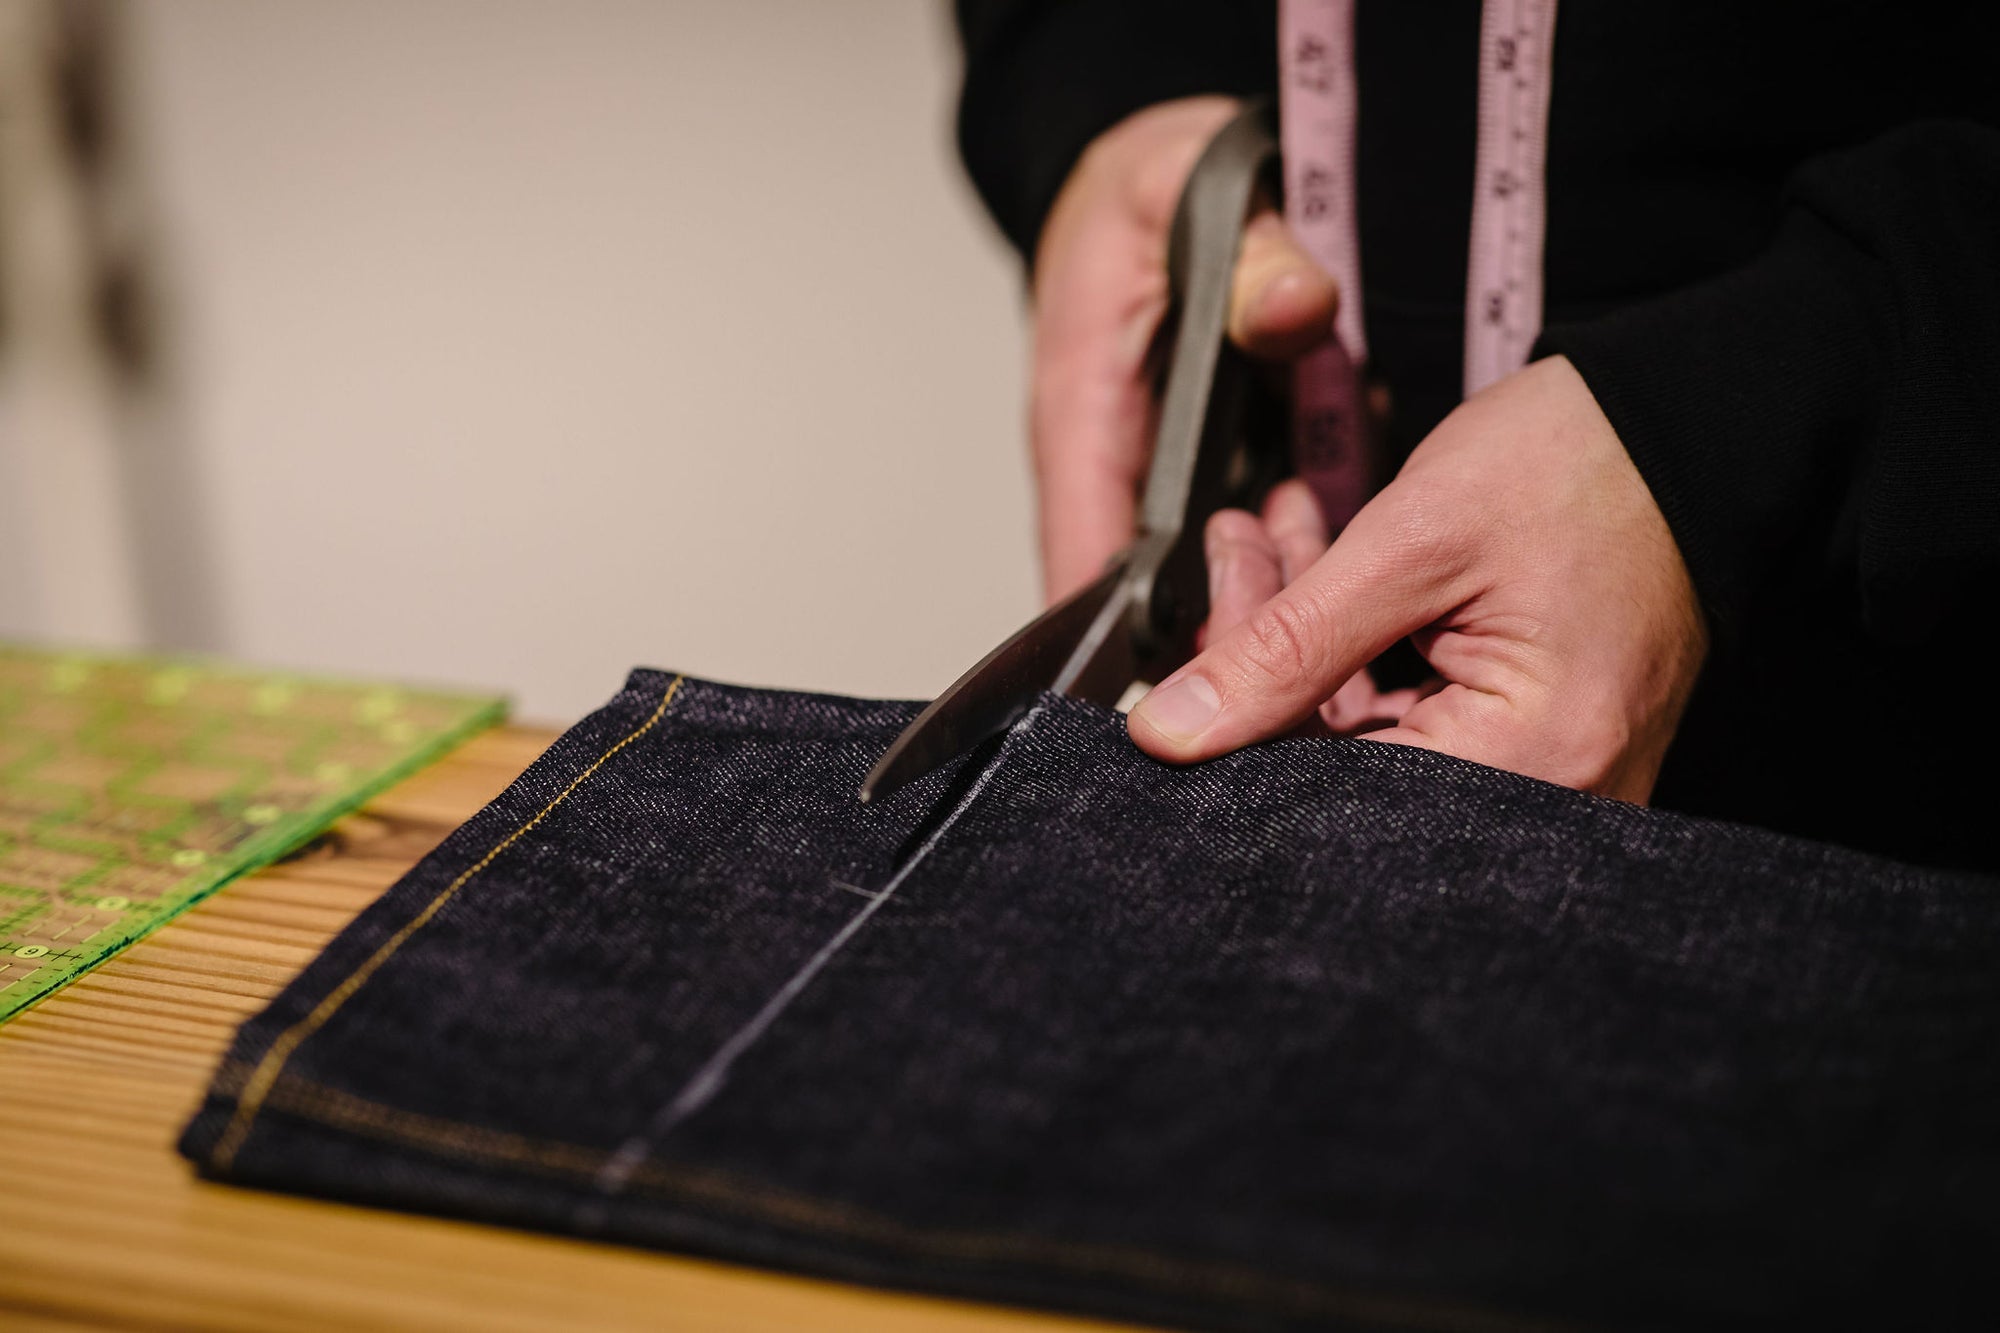 Hemming with Purchase - Franklin & Poe